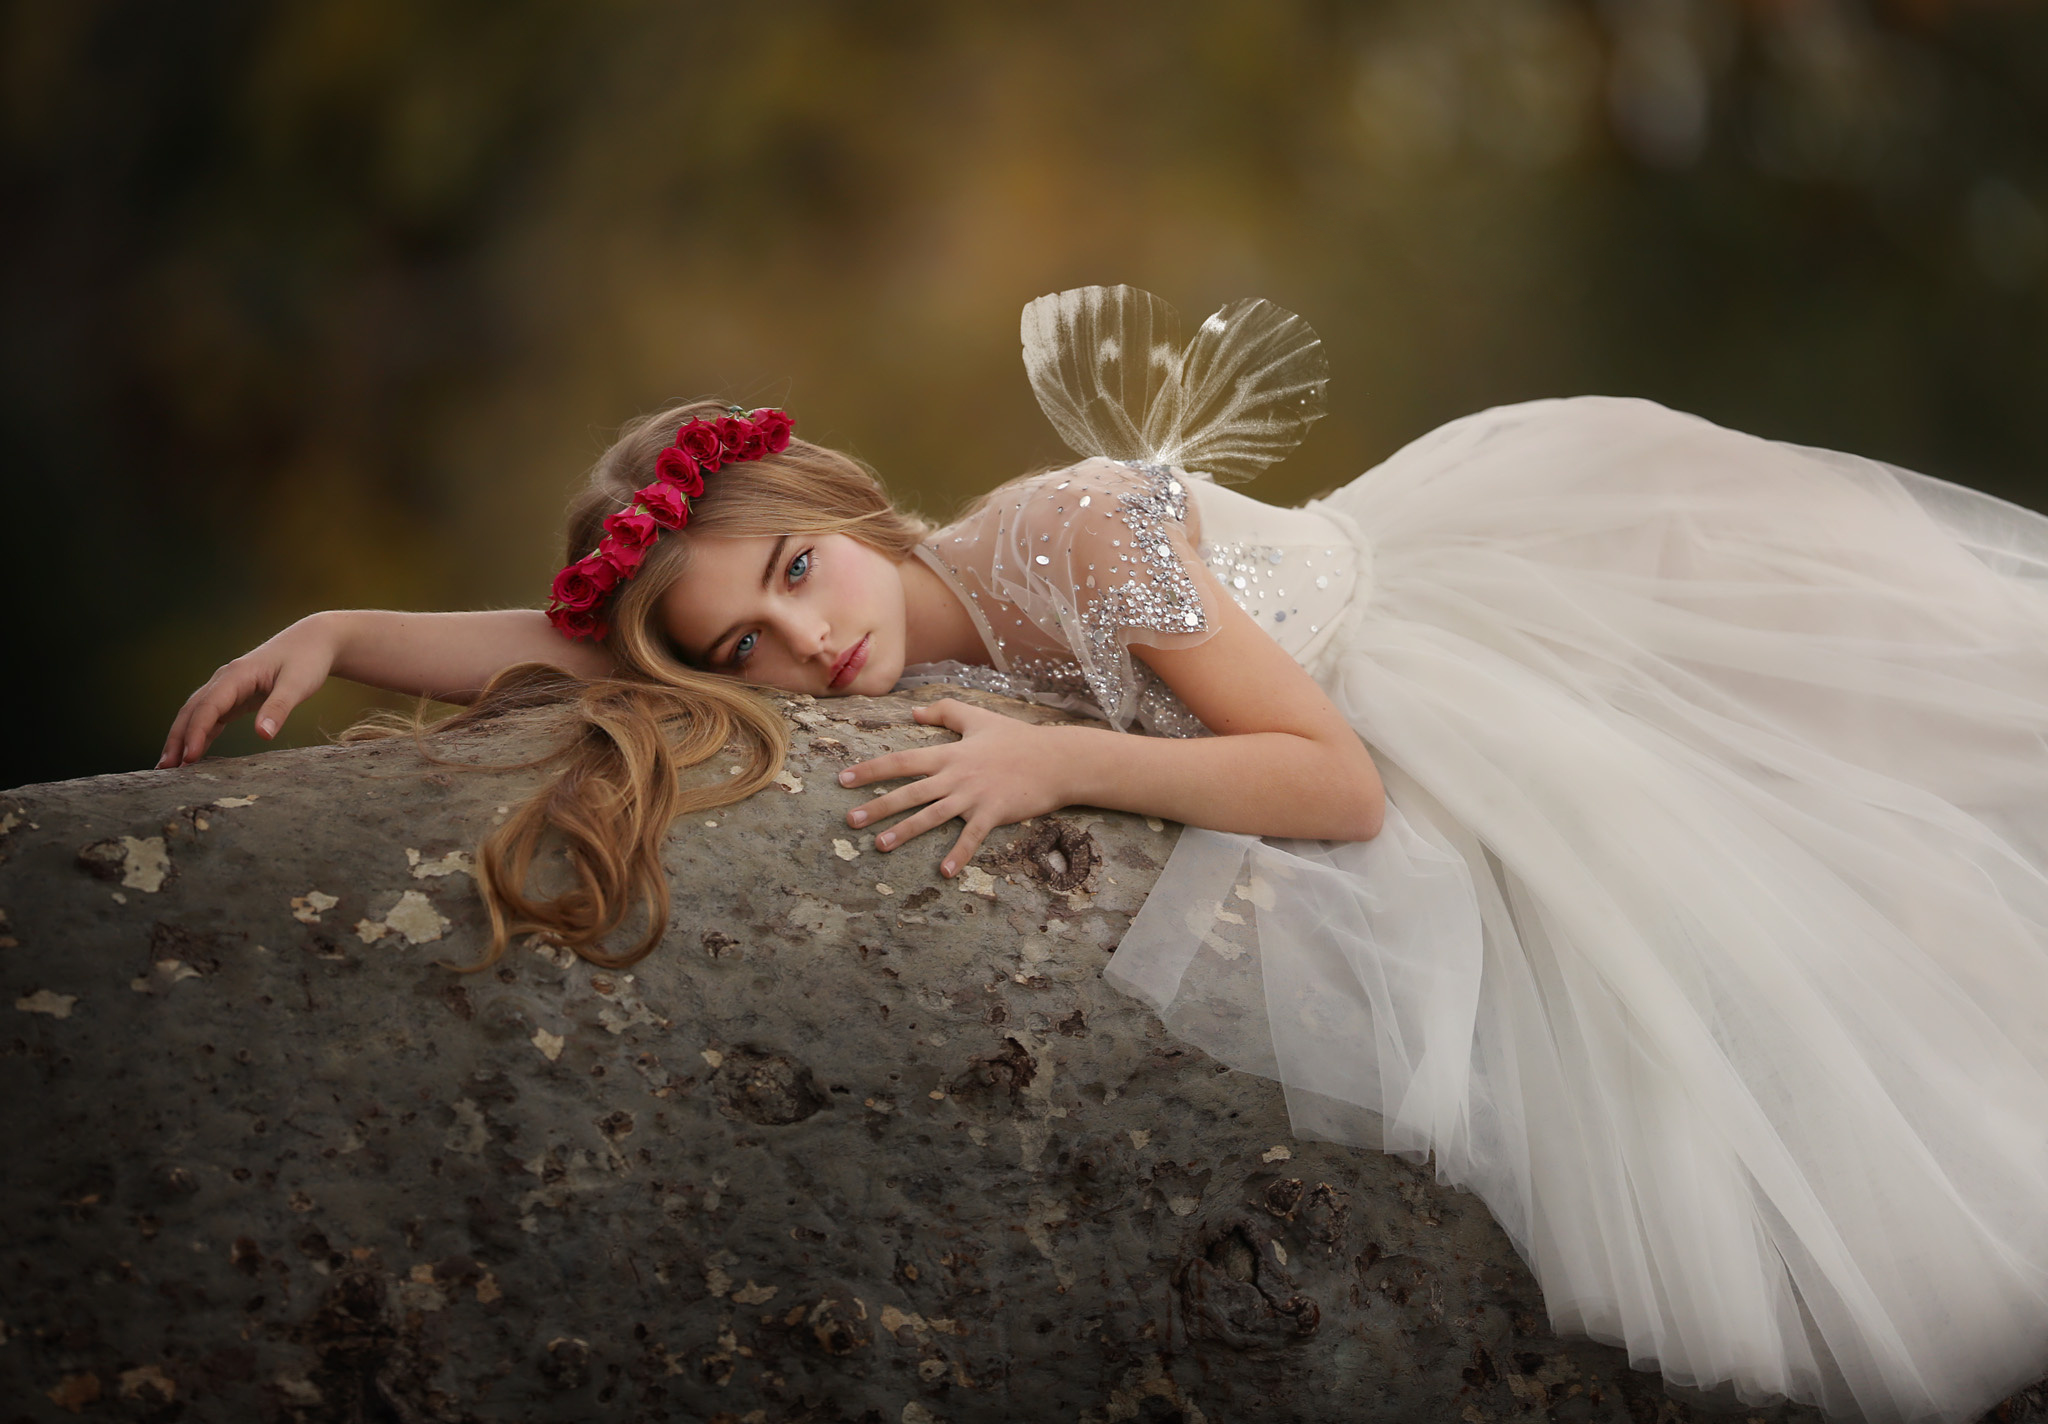 child, photography, hair, red rose, rose, white dress, wings, wreath